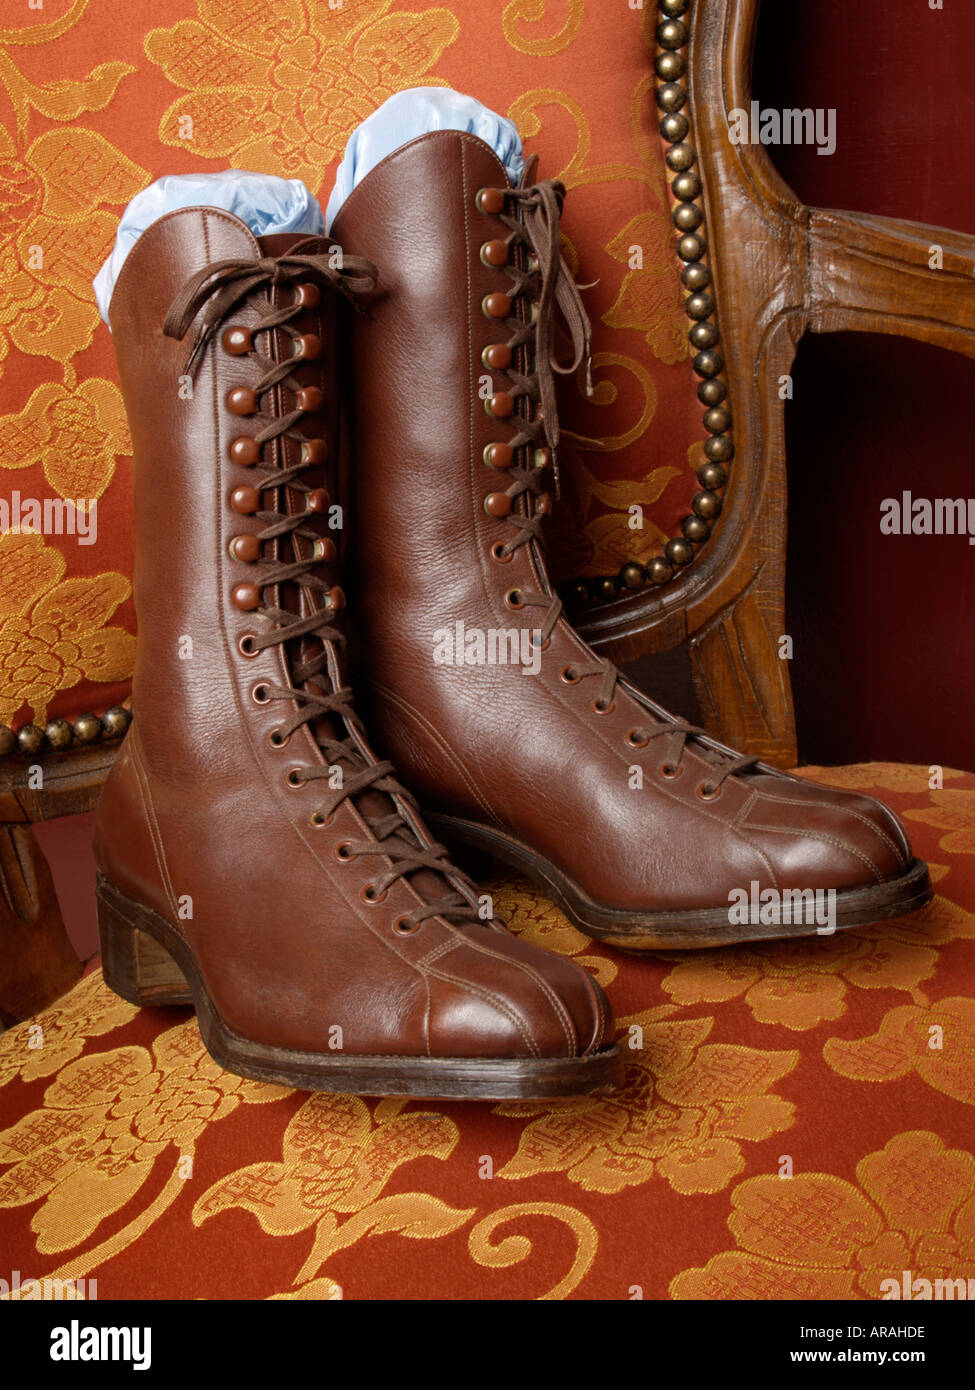 Pair of nostalgic old laced ladies boots shoes on antique chair Stock Photo